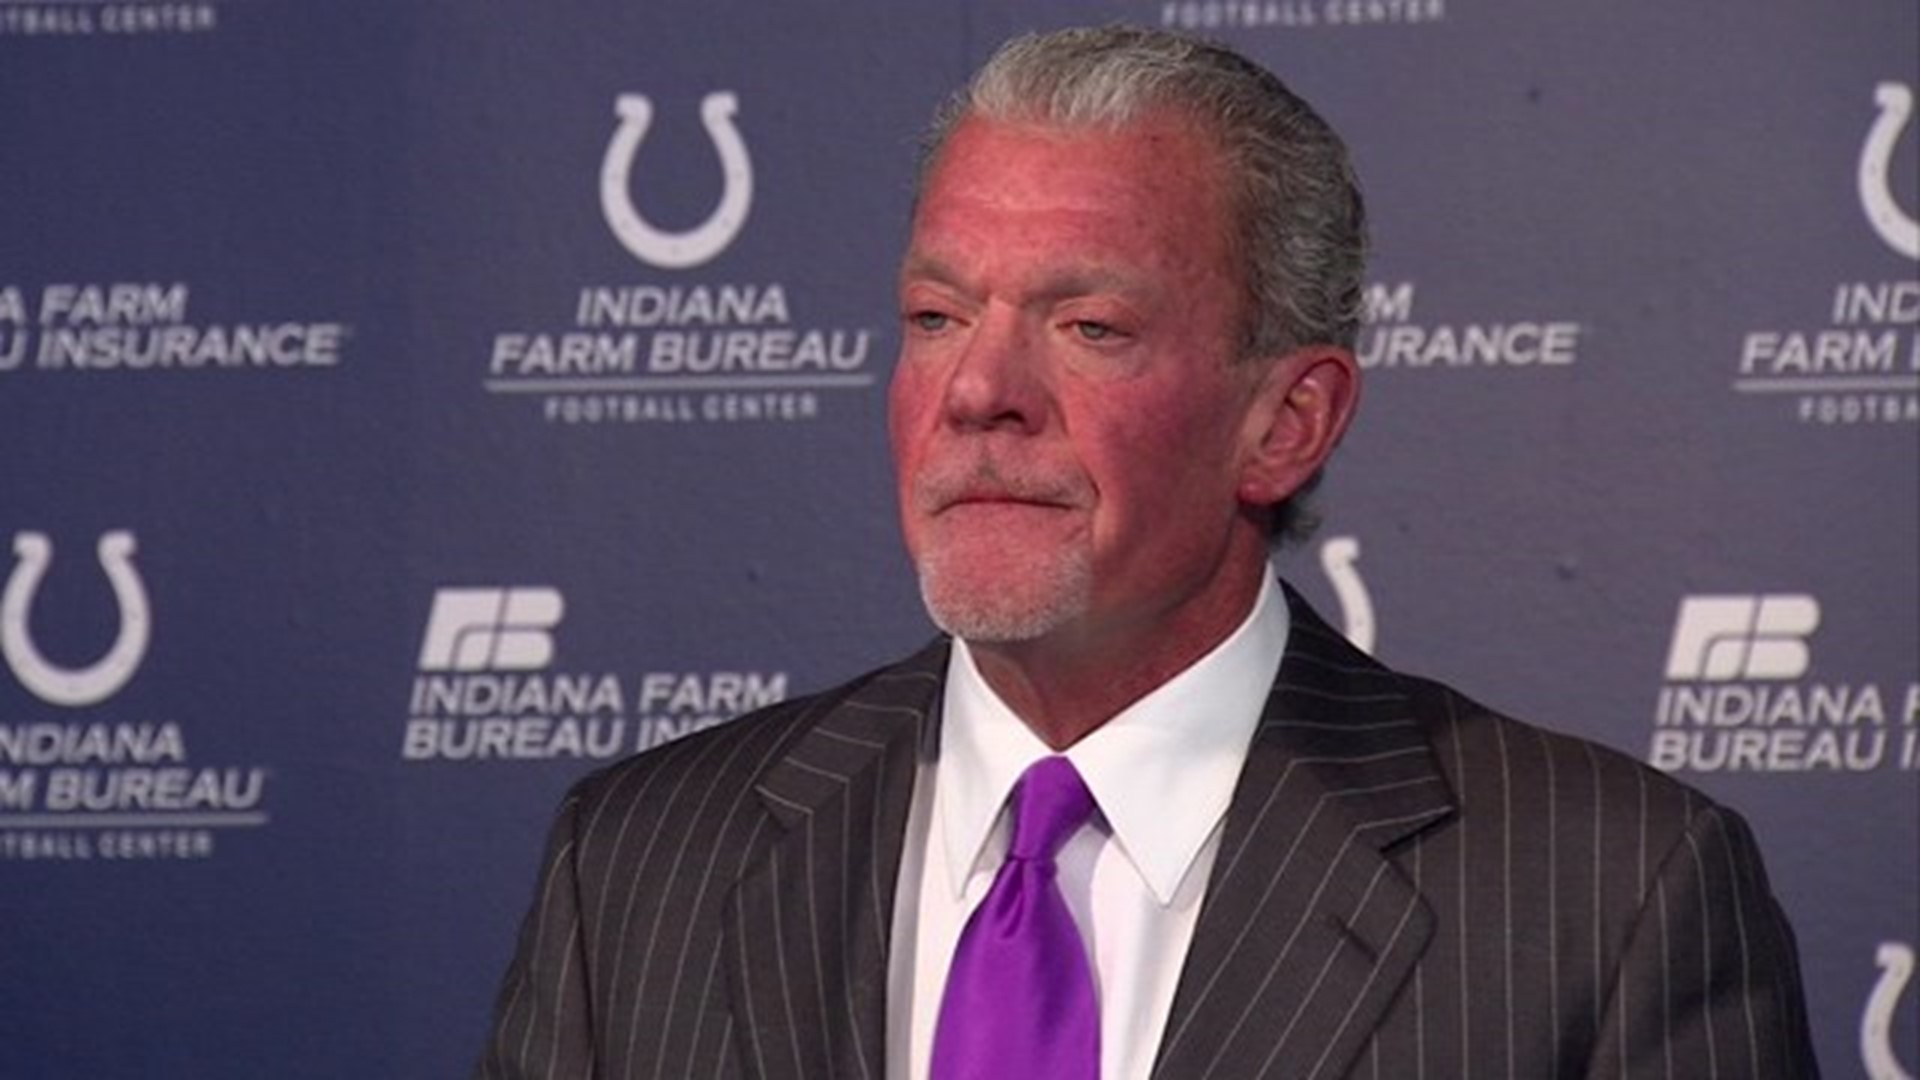 Colts owner Jim Irsay didn't pull punches in his message. He wrote the Colts ended the season in perhaps the worst possible way and that the buck stops with him.